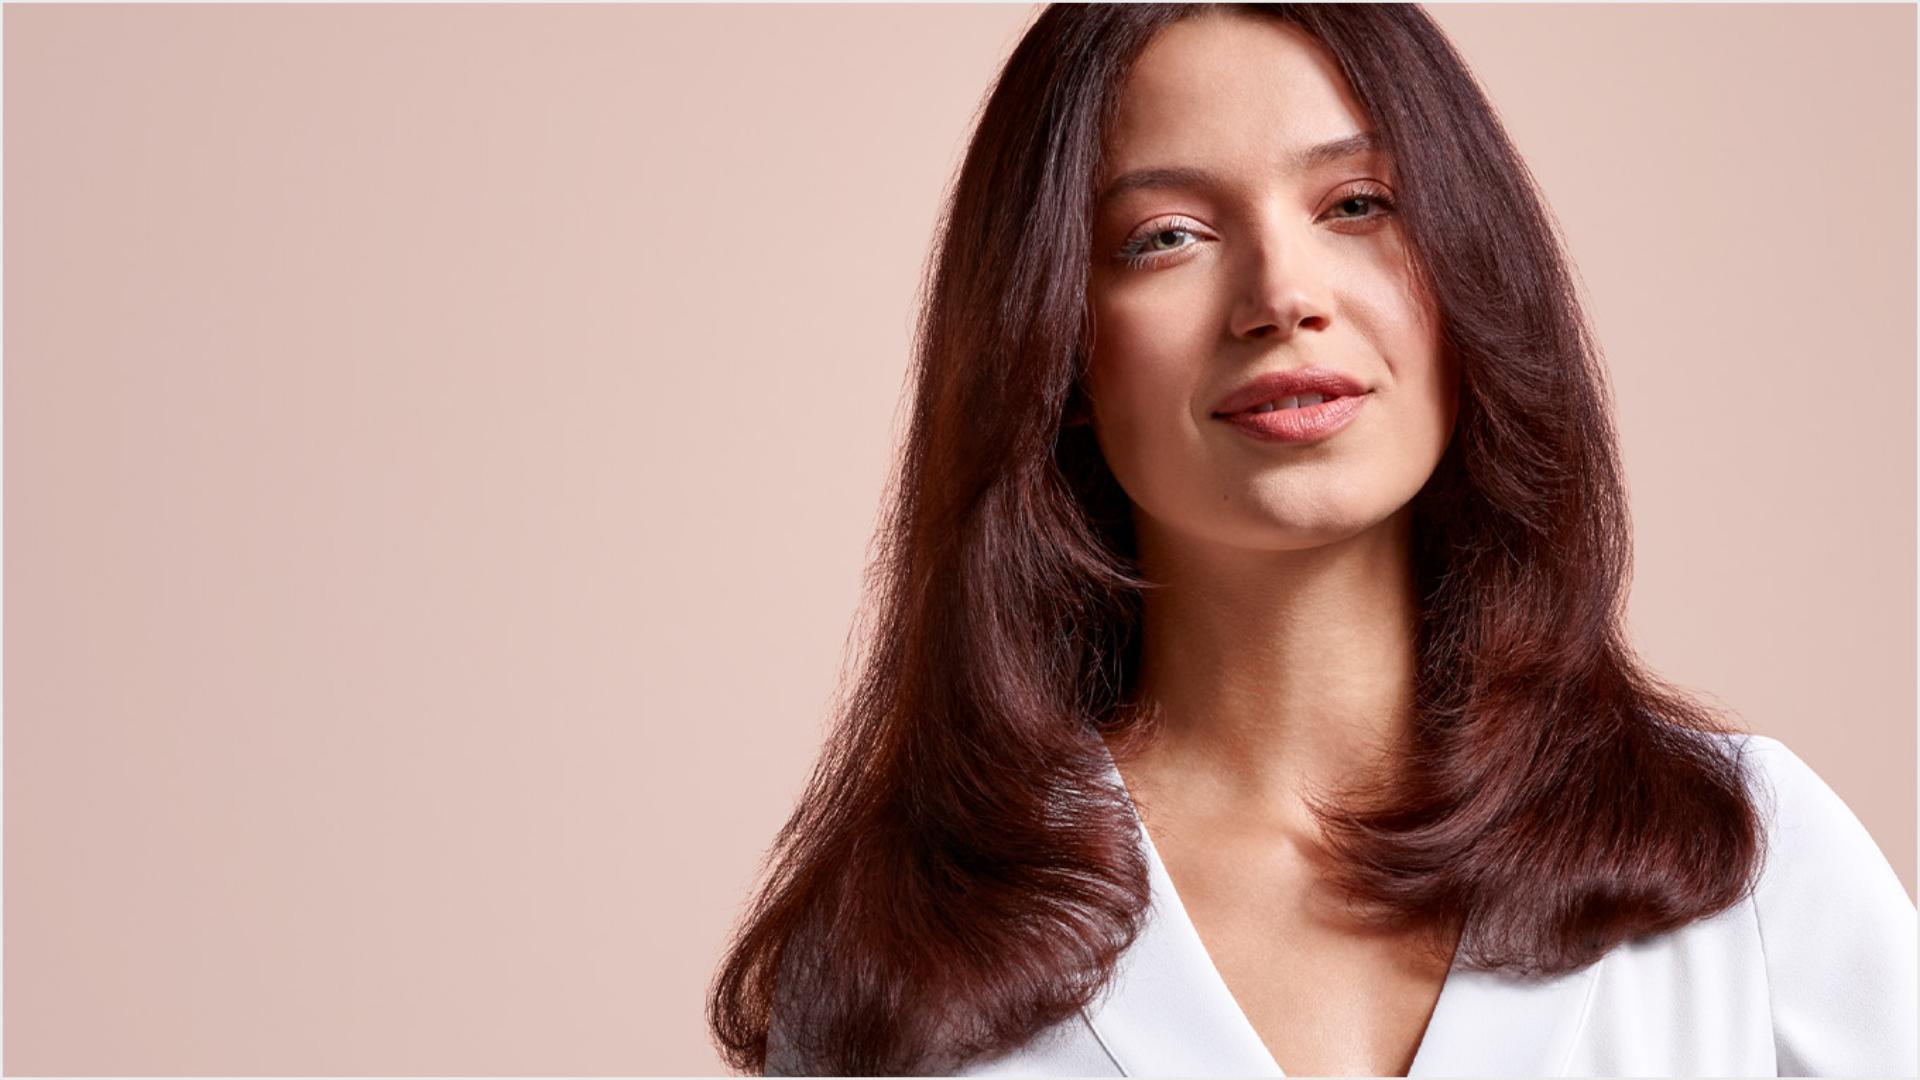 A model with mid-length brunette hair, wearing a volumised straight style.